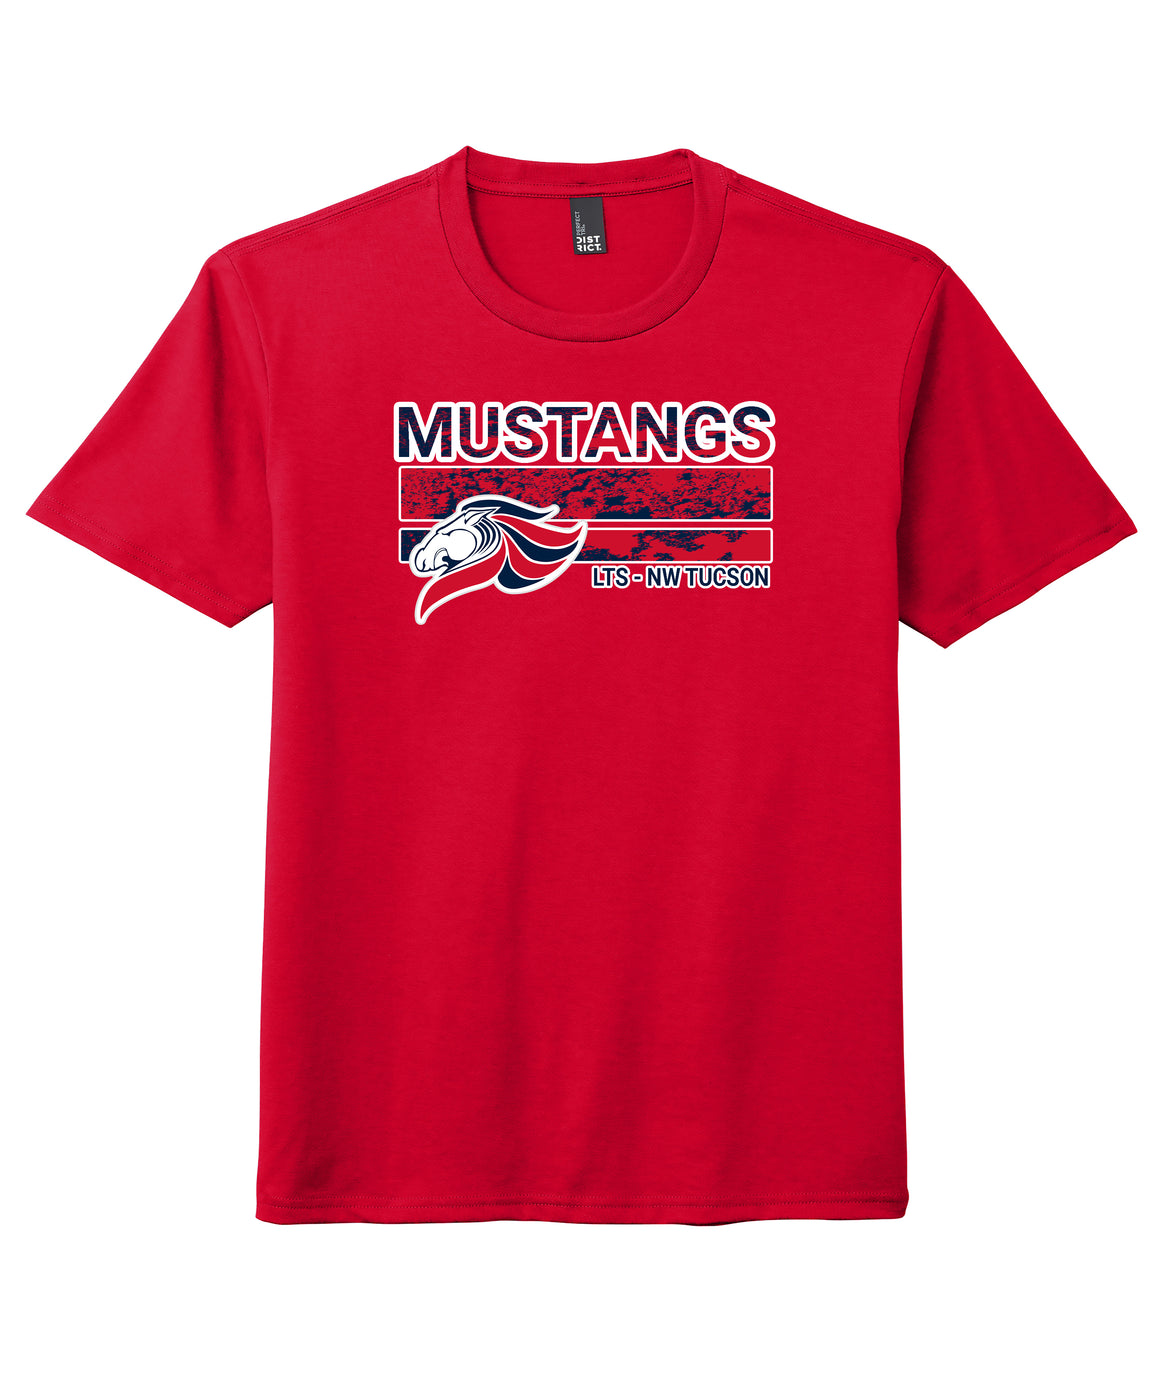 LTS NW Tucson PTO - Mustangs Blended Print